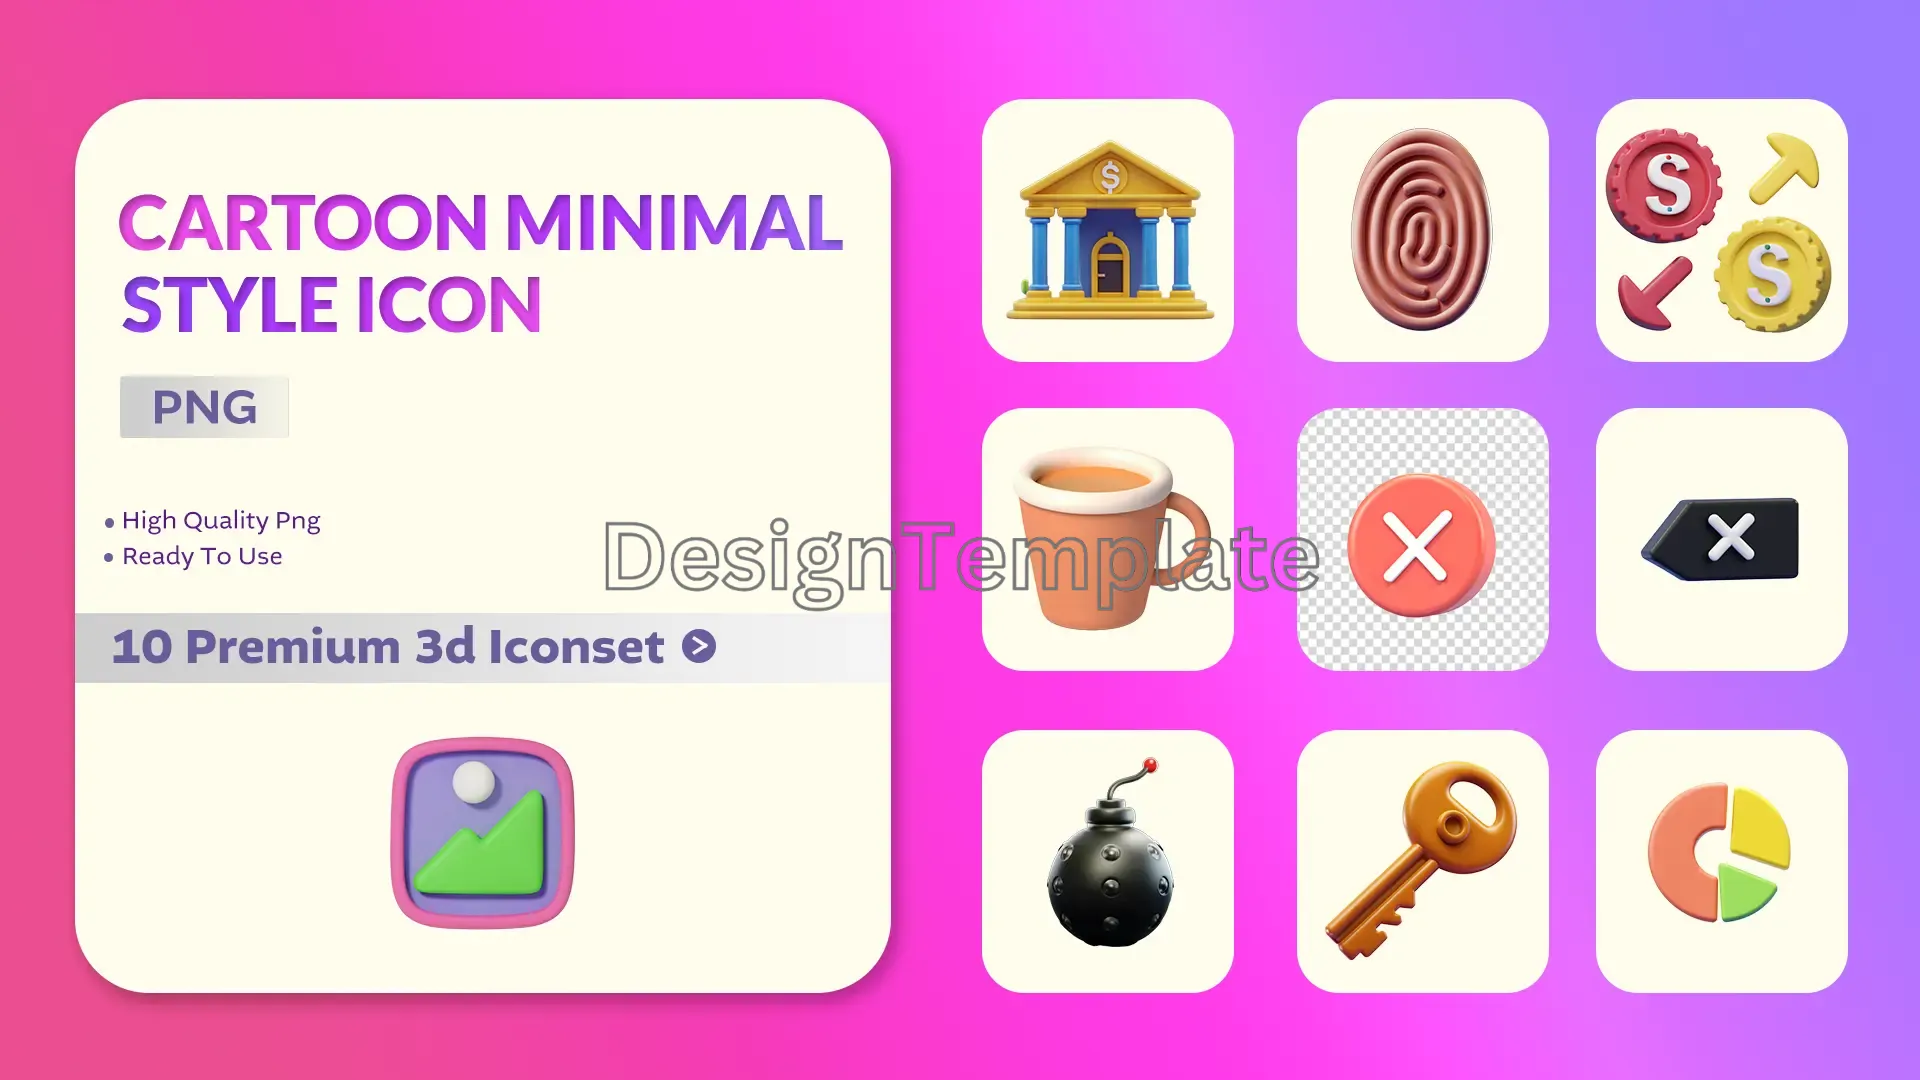 Cartoon Minimal Style Icon 3D Elements Pack